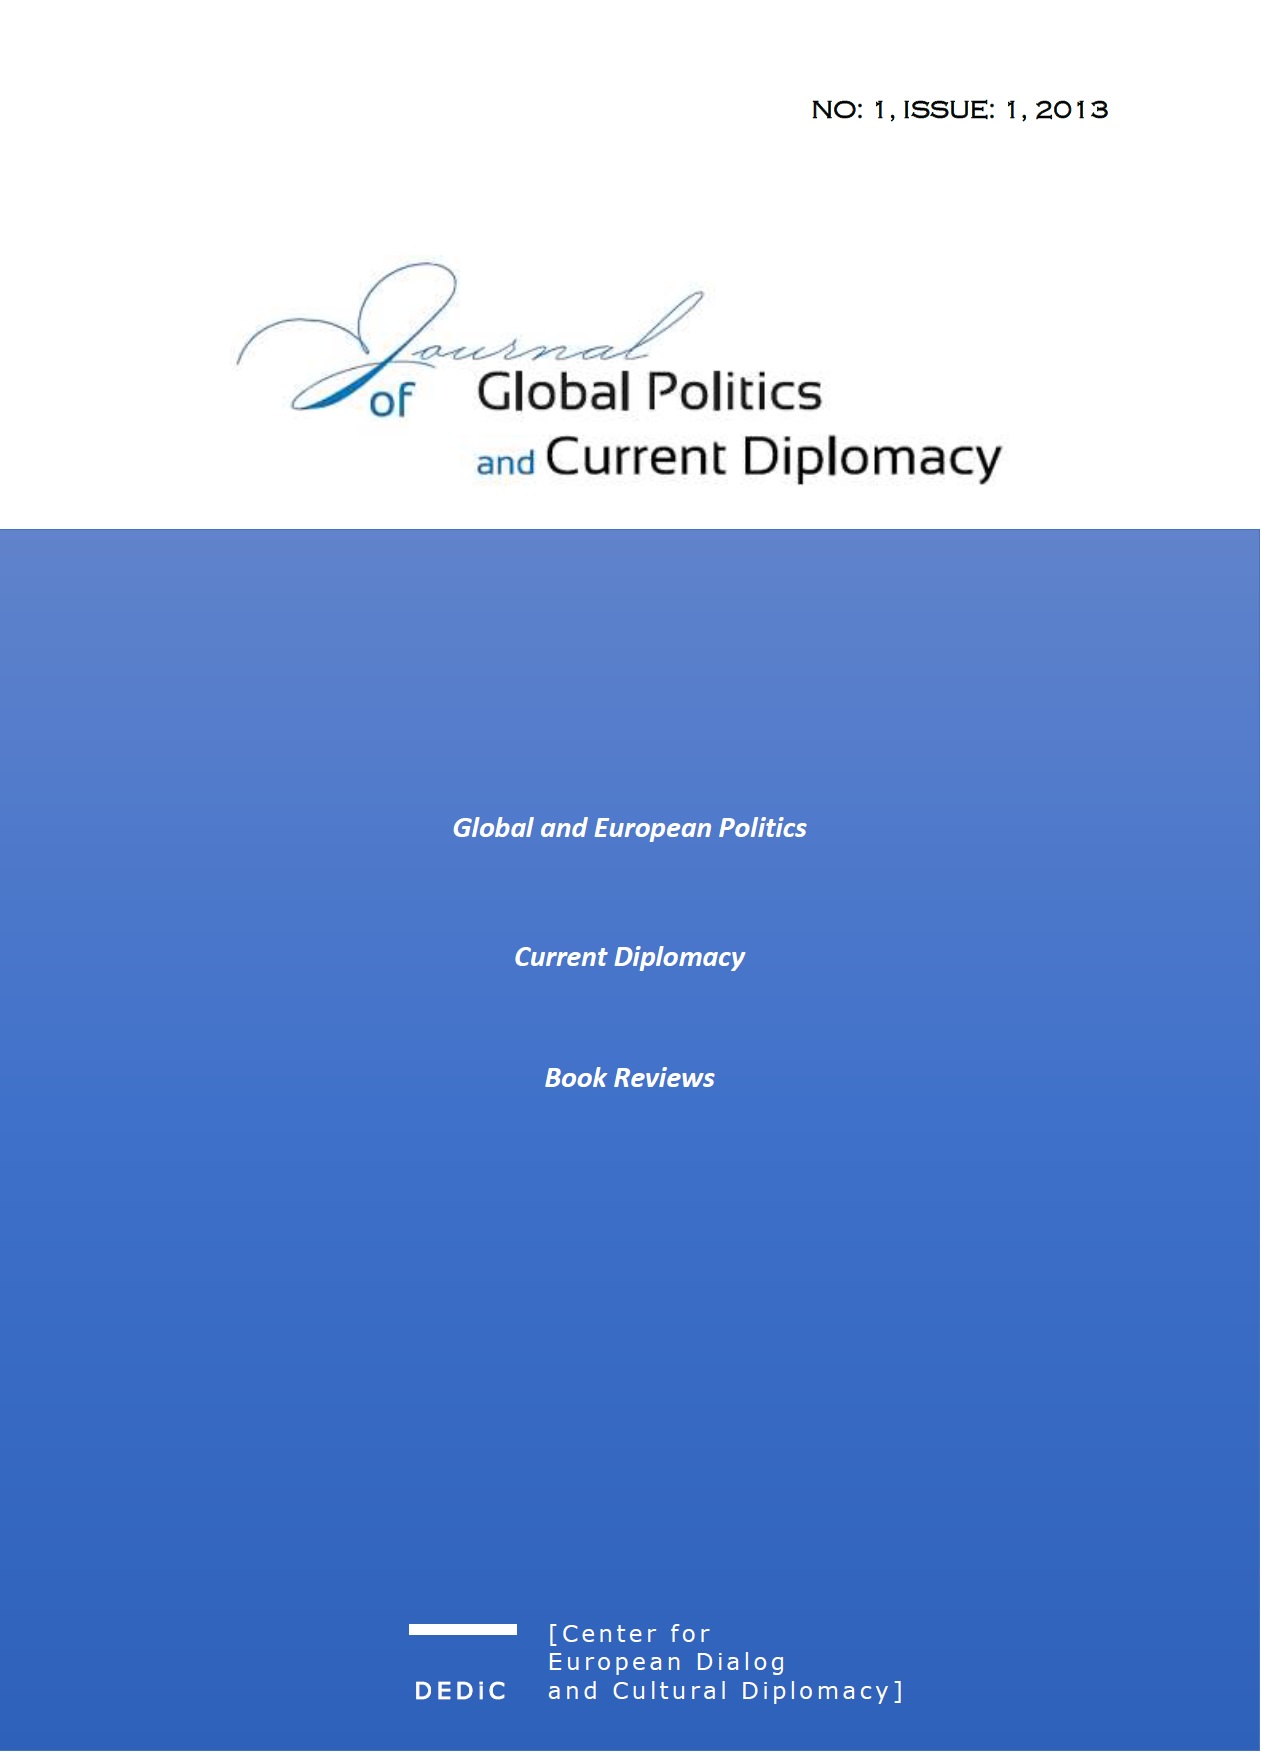 Journal of Global Politics and Current Diplomacy